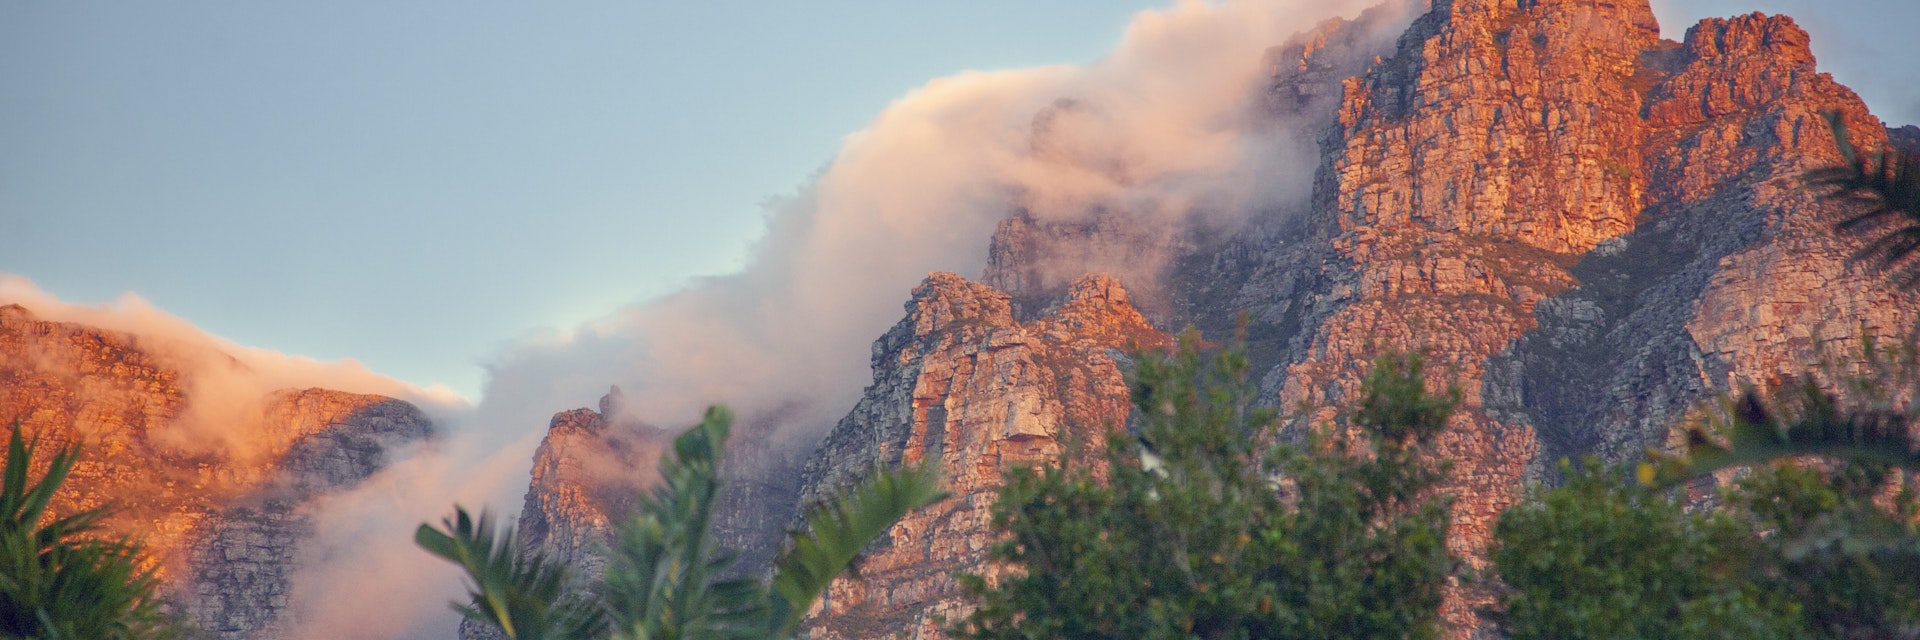 Table Mountain with Tablecloth of cloud at sunset, Cape Town, South Africa